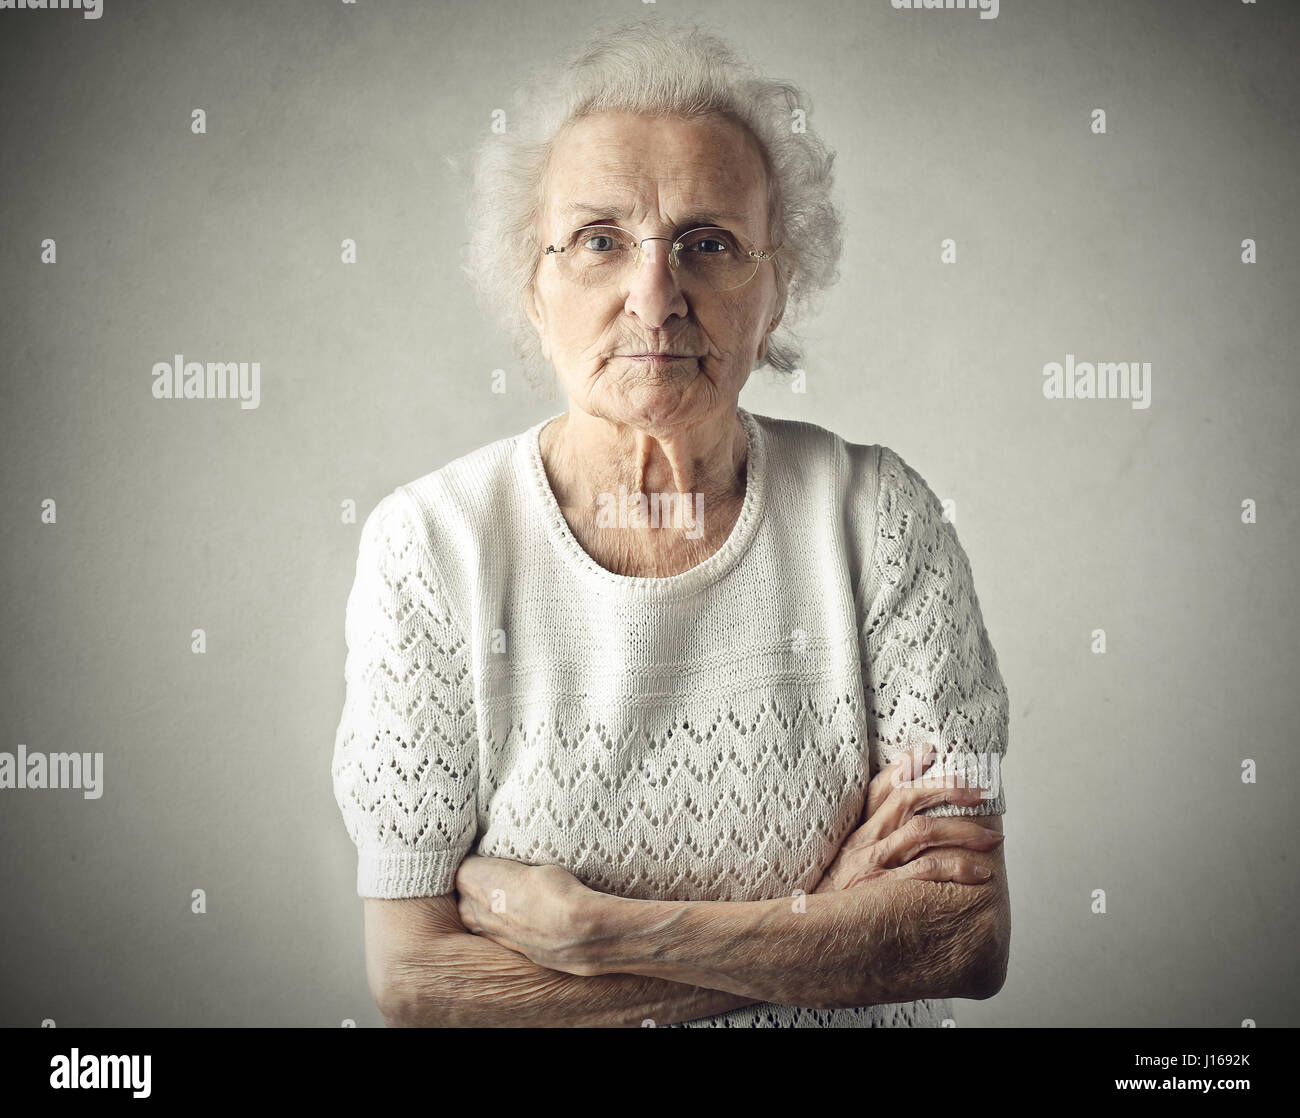 Old lady crossing her arms Stock Photo